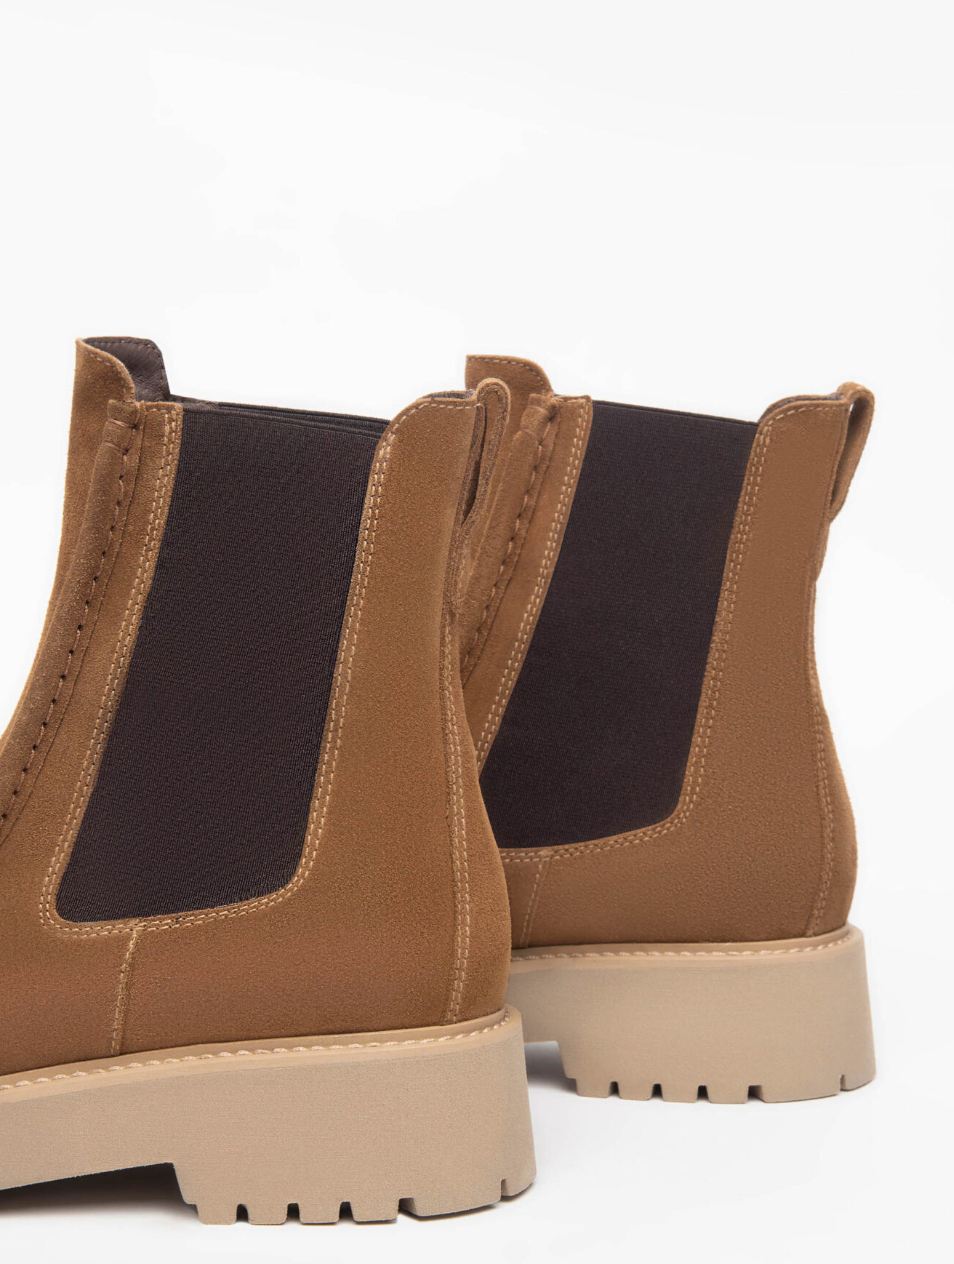 Camel Suede Leather Boot